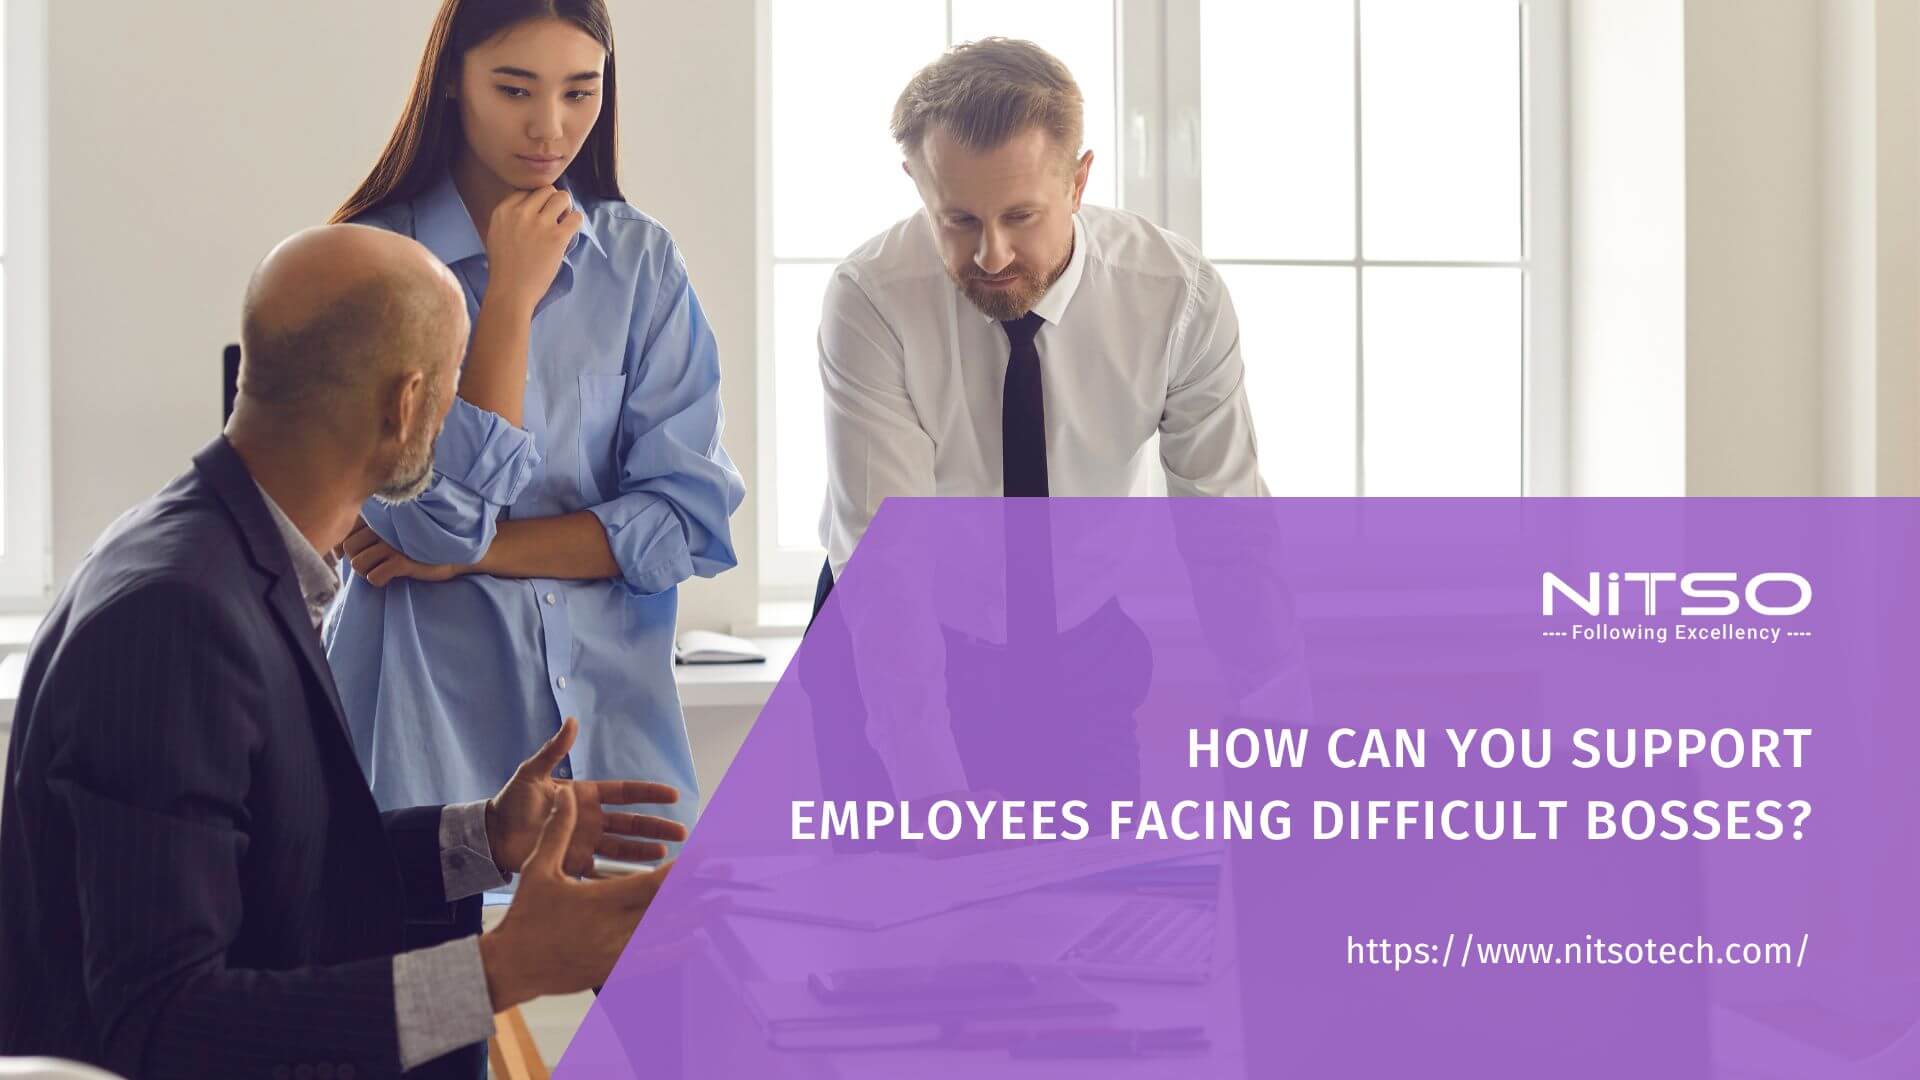 How Can You Support Employees Facing Difficult Bosses?